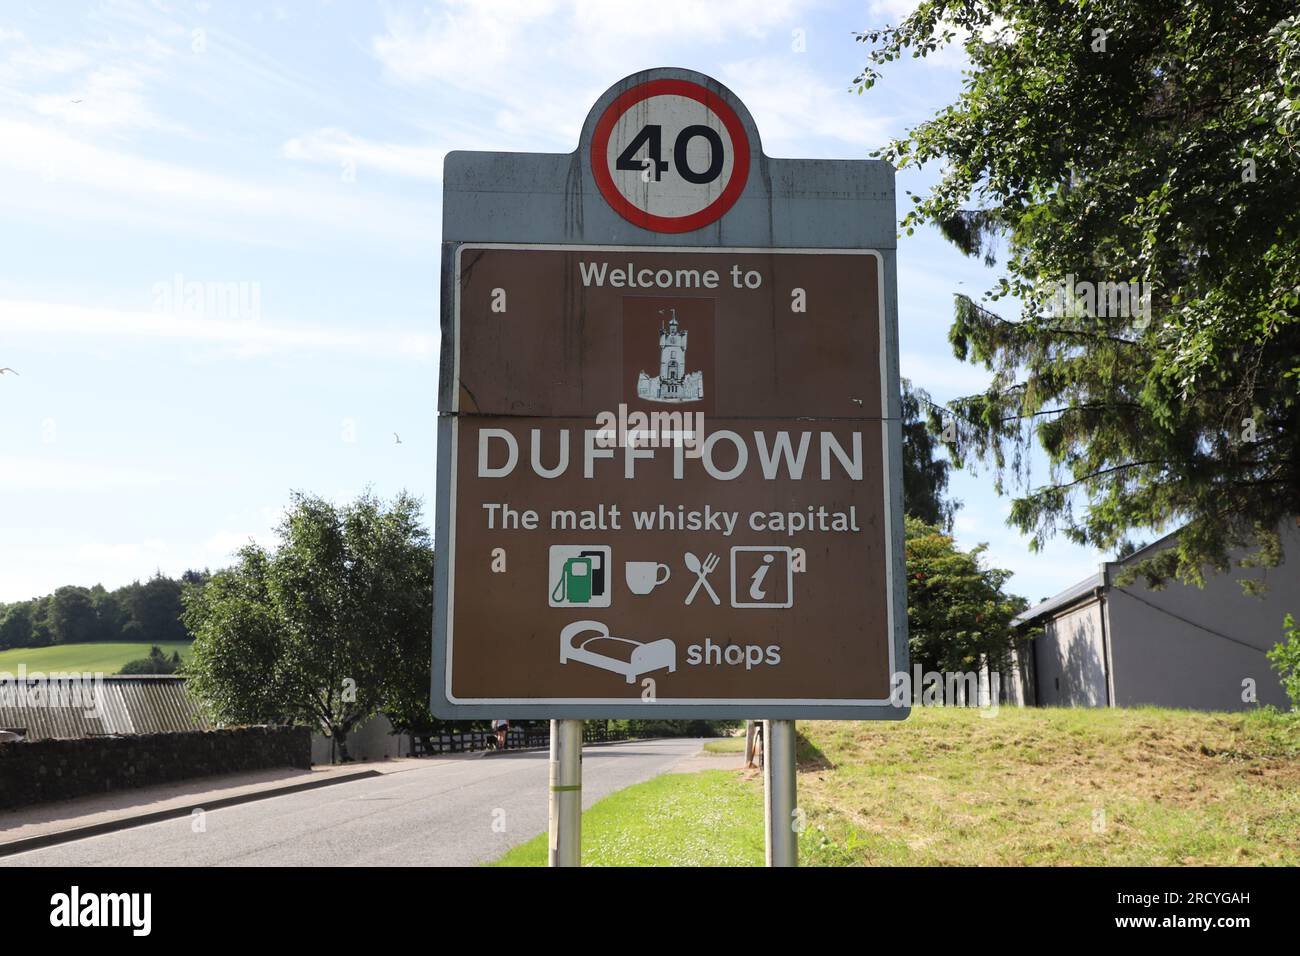 Welcome to Dufftown - The Malt Whisky Capital sign Dufftown Scotland  July 2023 Stock Photo